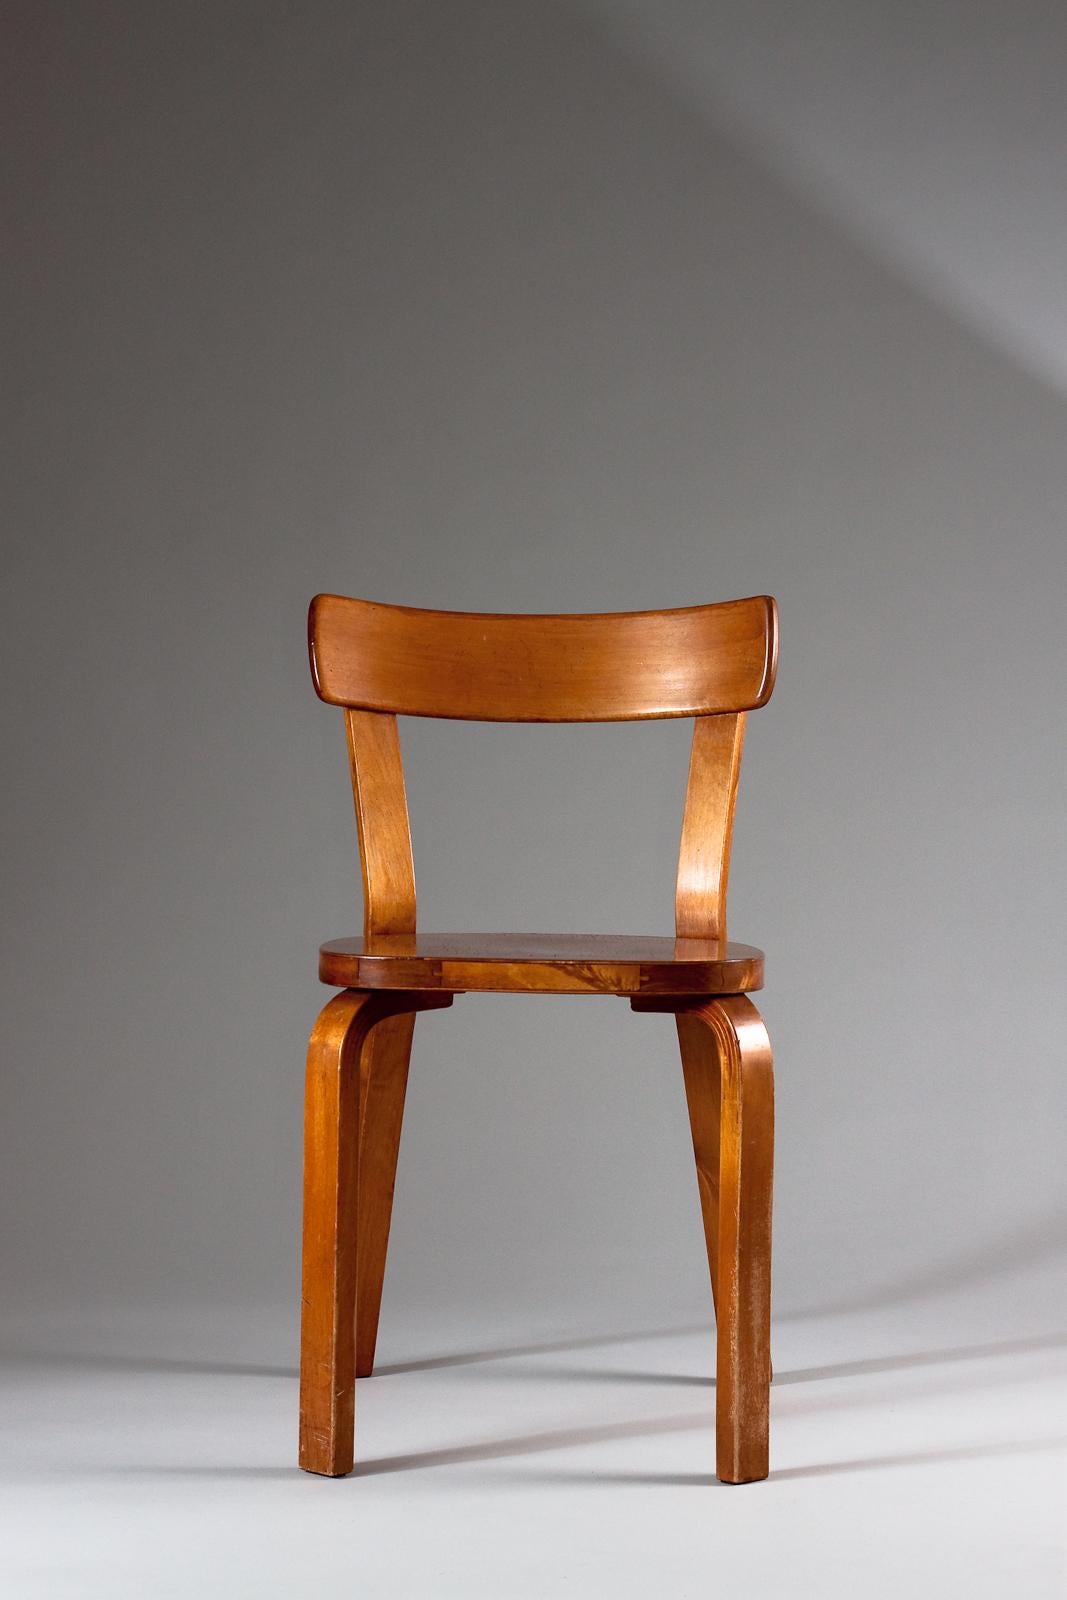 Alvar Aalto, Original 1930s Chair 69 with Great Colour and Patina For Sale 3